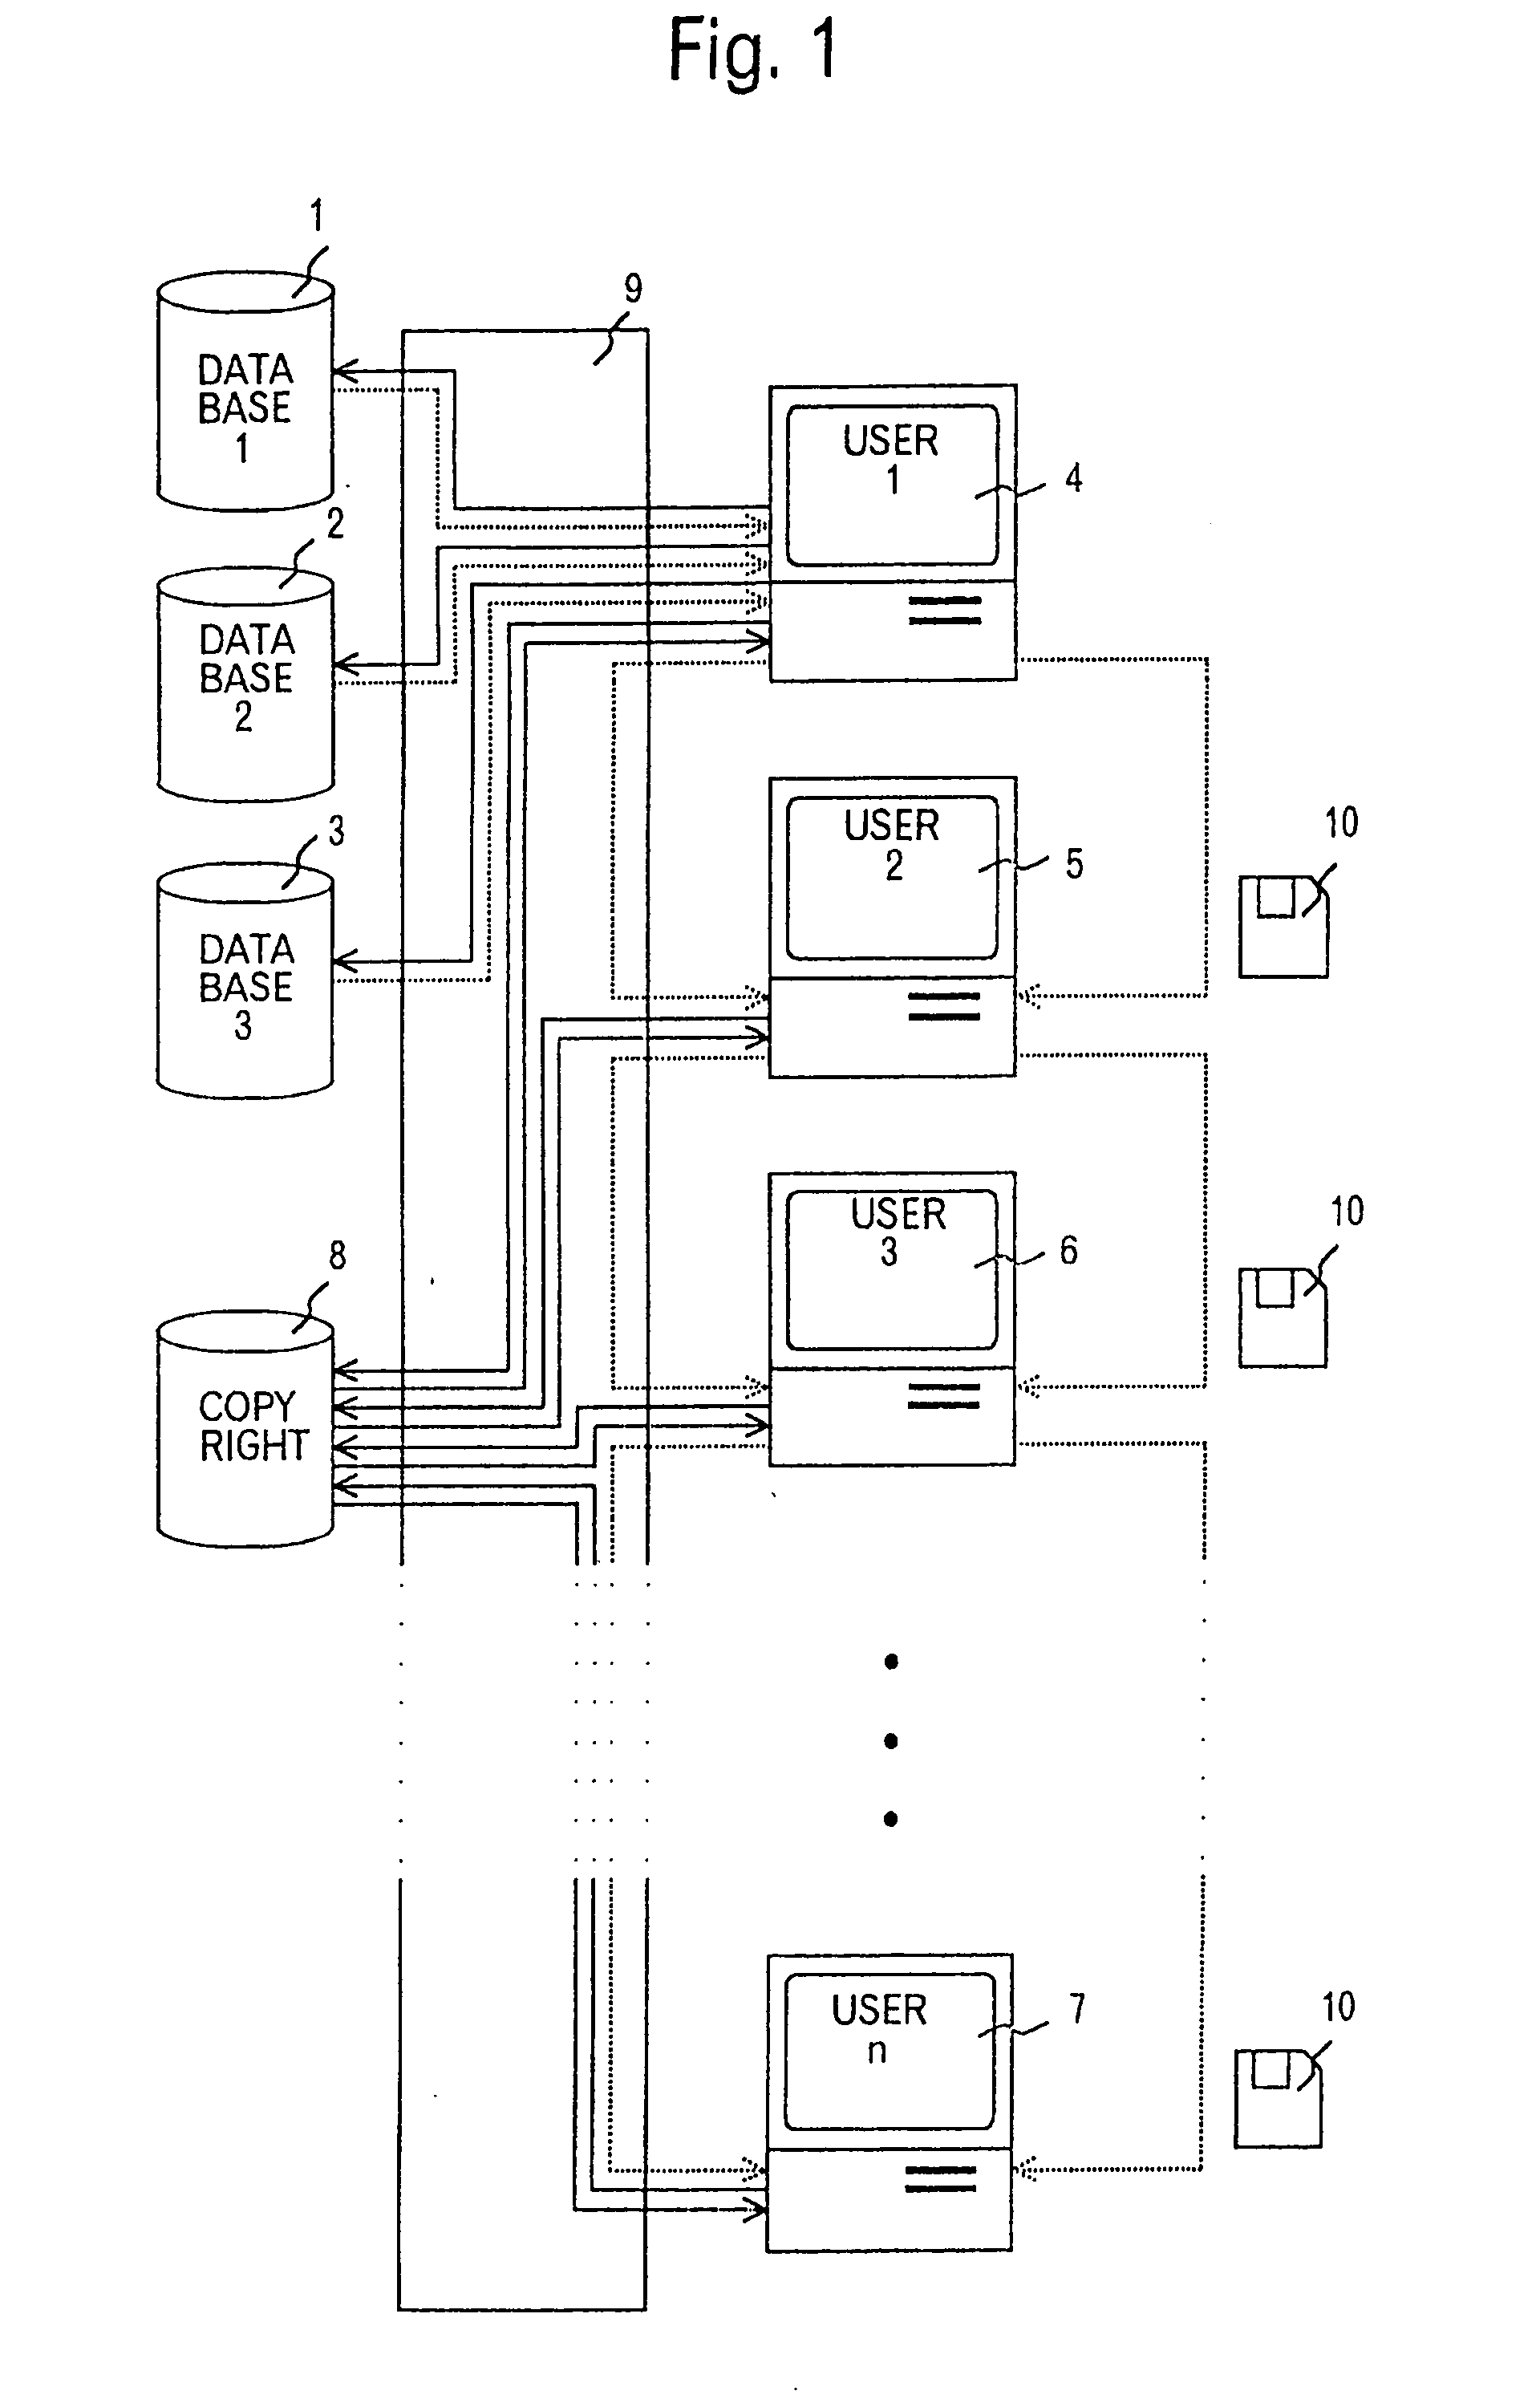 Digital content management system and apparatus